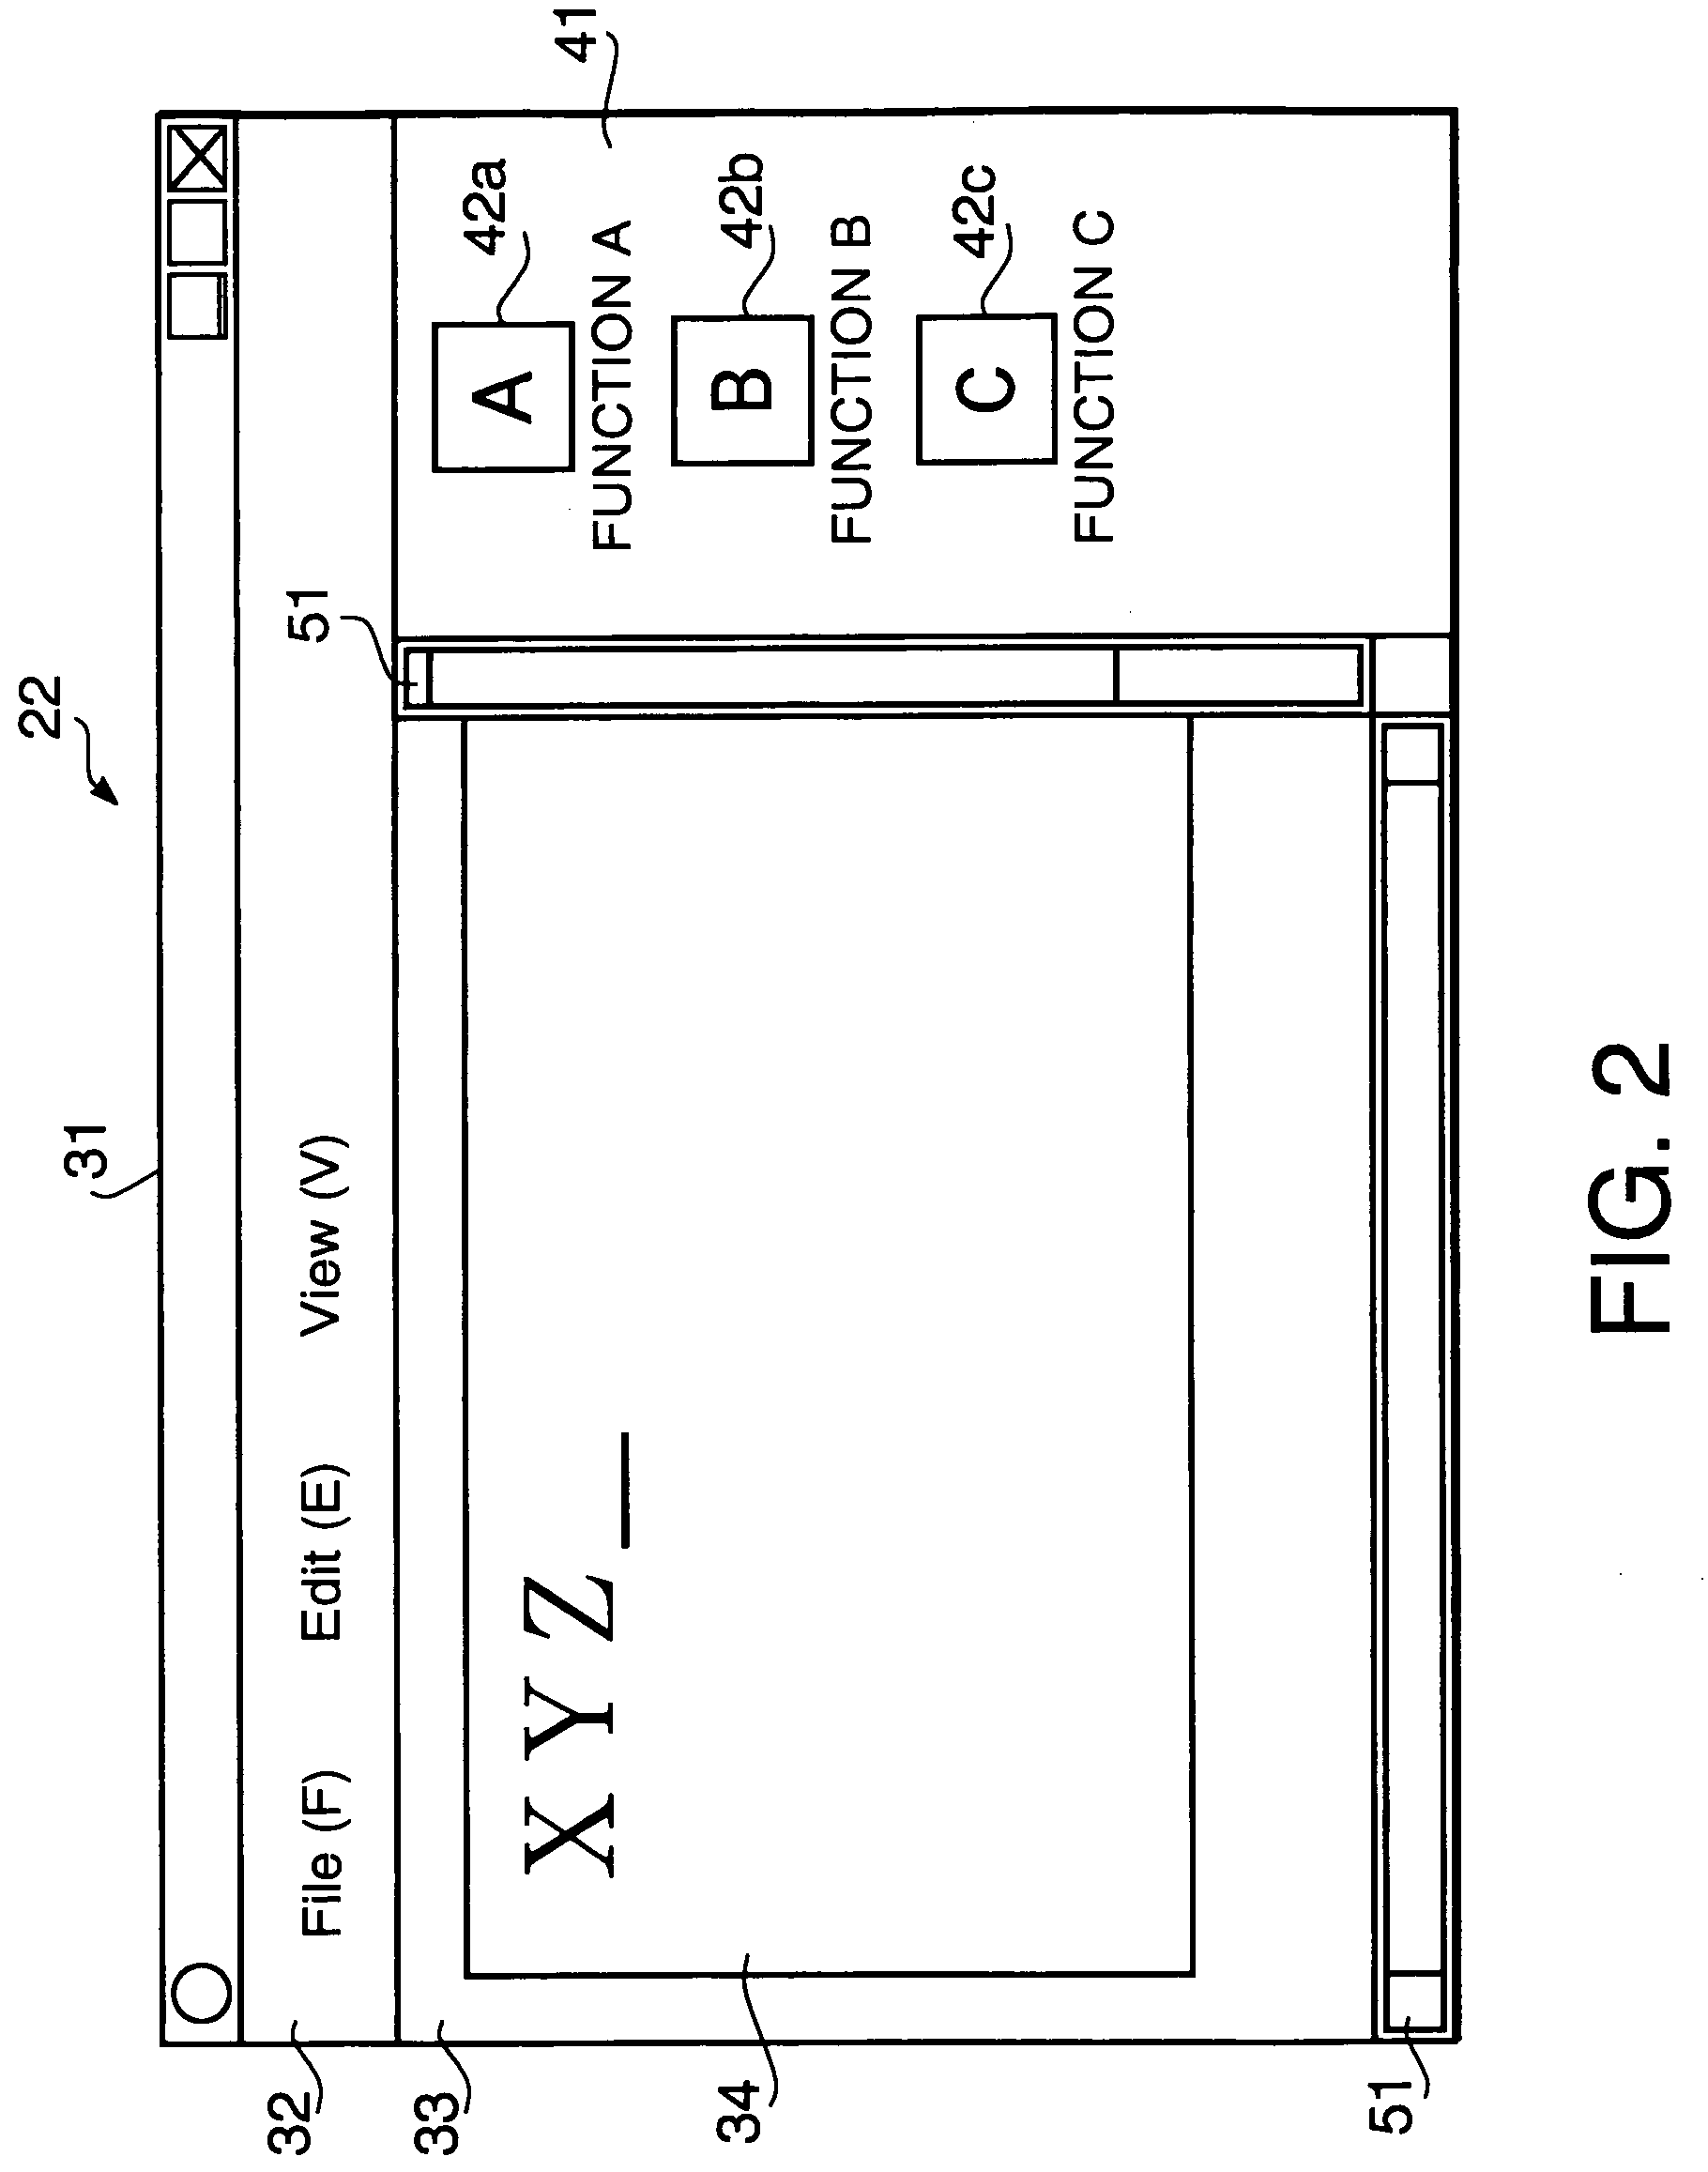 Display control device and program